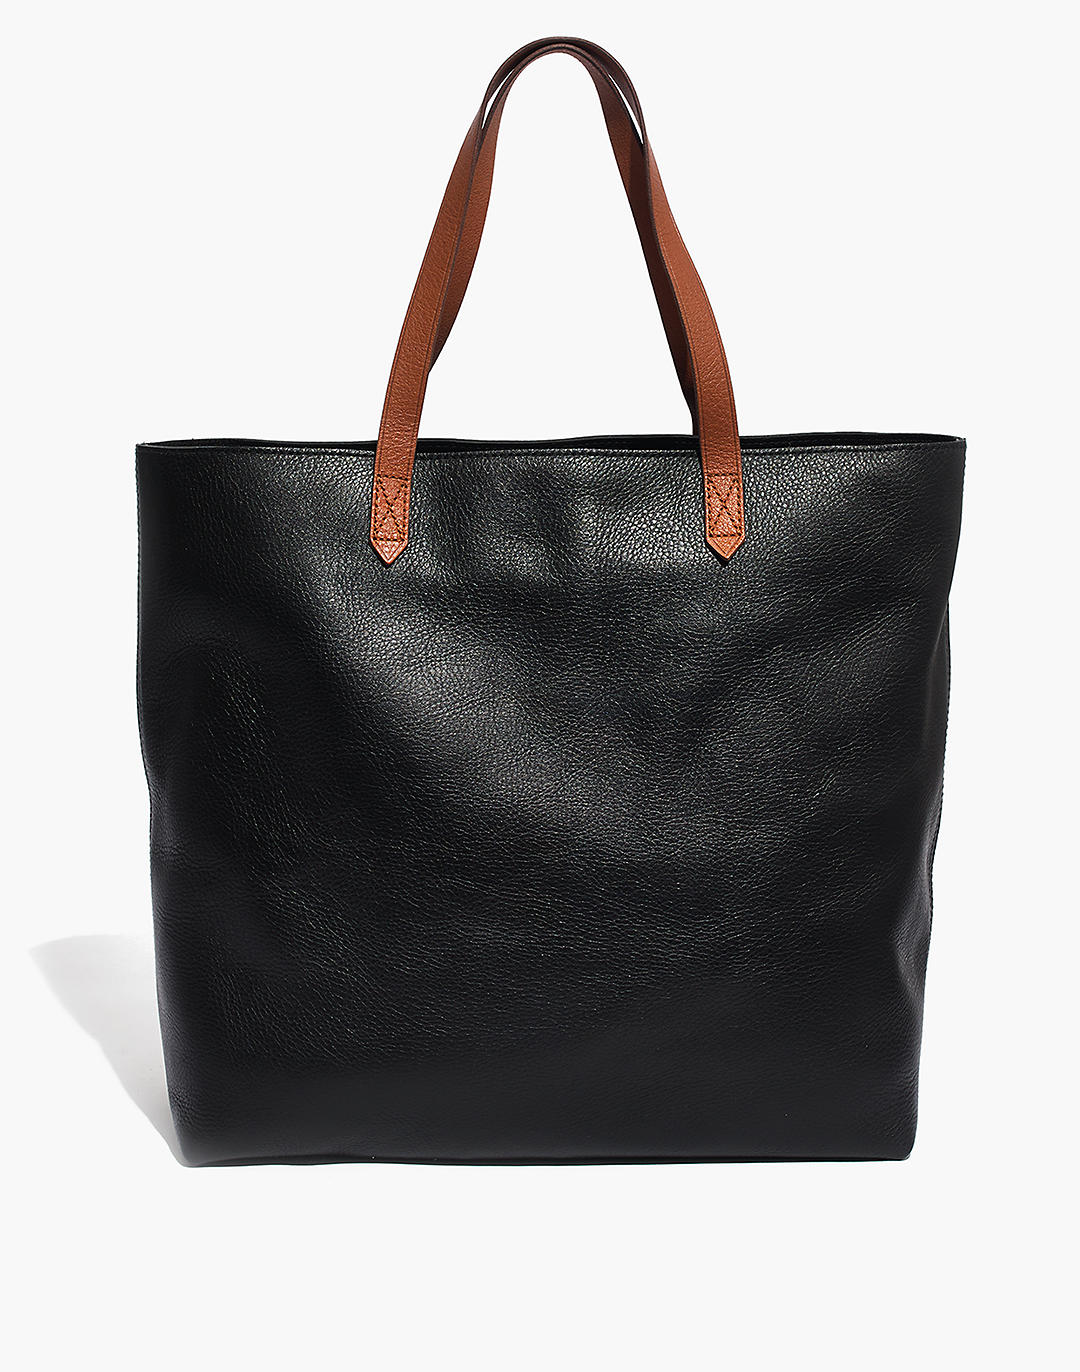 The Transport Tote in true black brown image 1